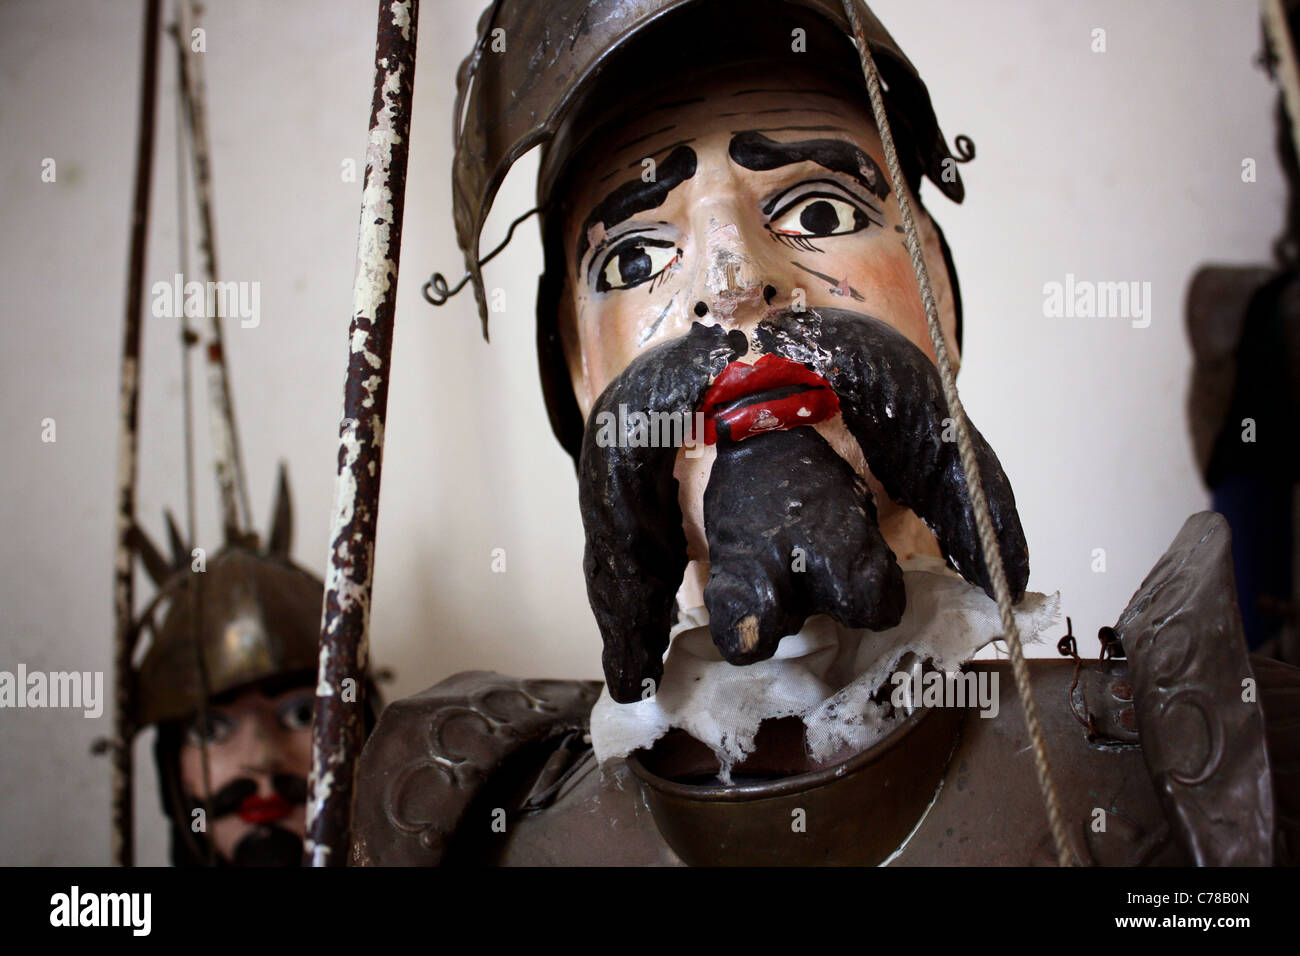 Close of of a large male Sicilian marionette / puppet with beard. Stock Photo